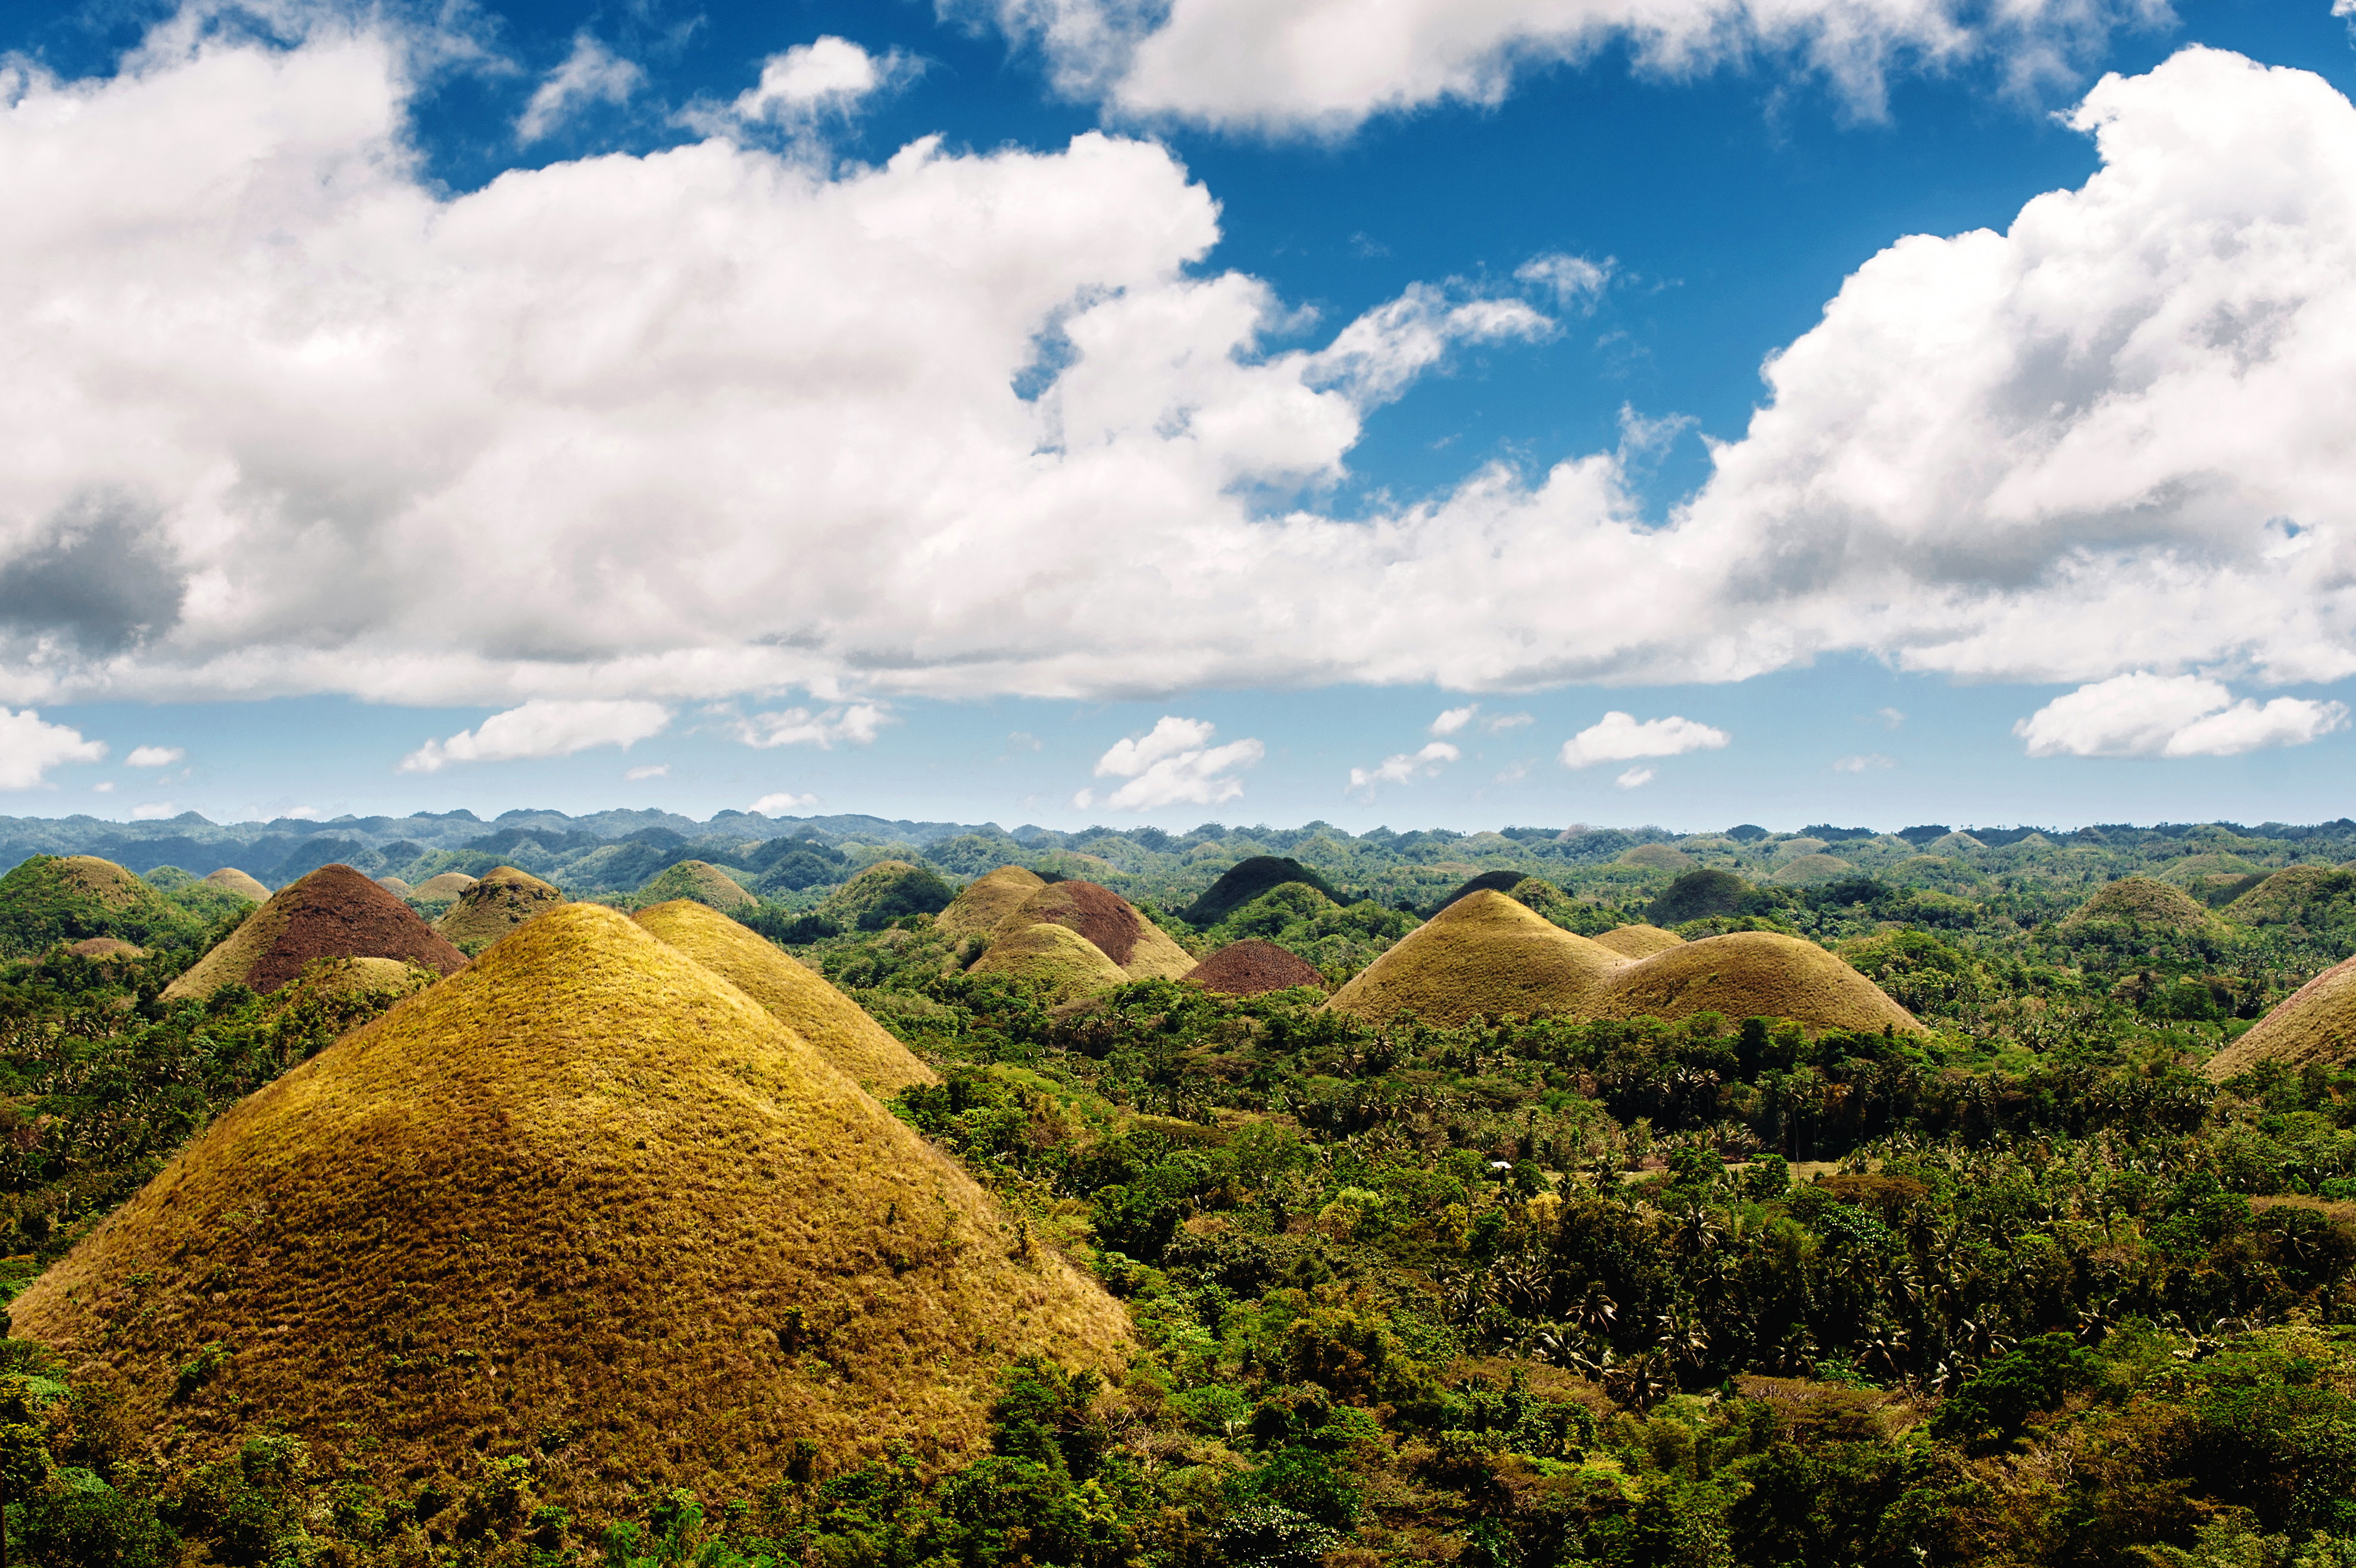 The Complete Guide to the Philippines' Chocolate Hills